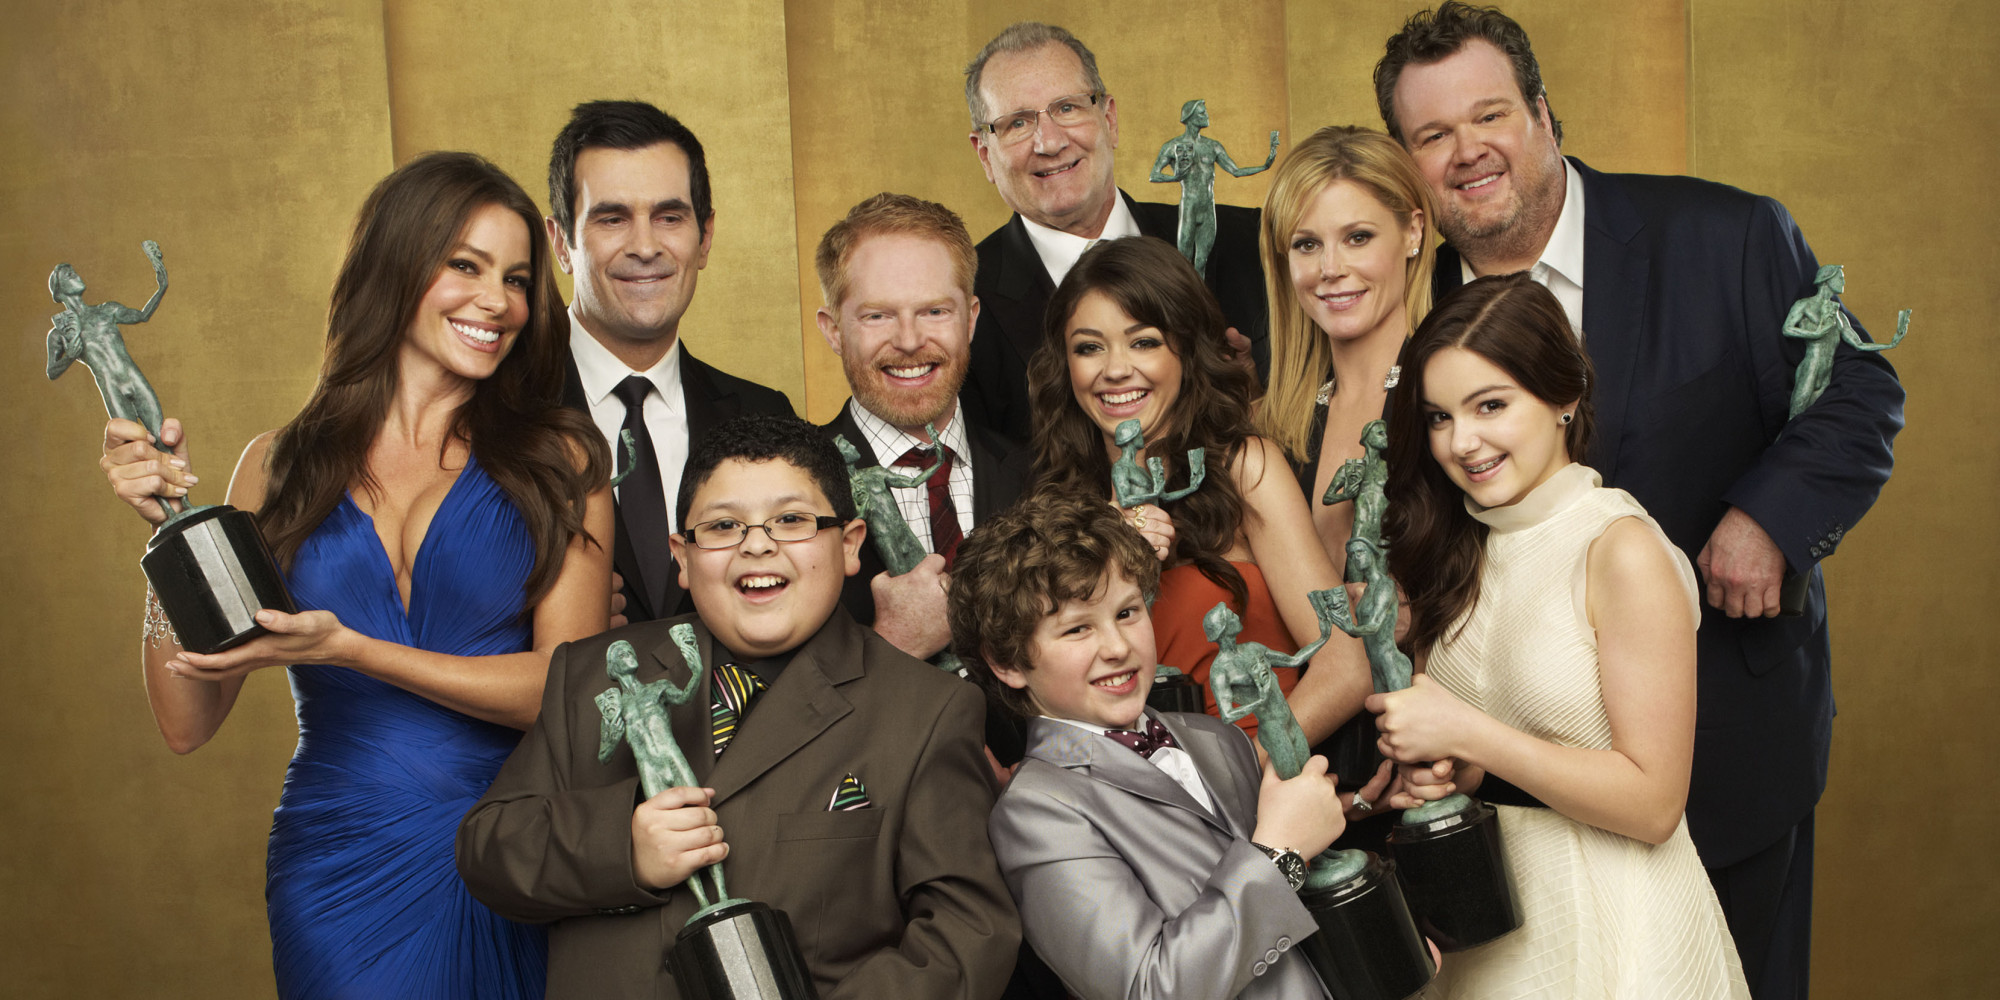 Modern Family Wallpapers Tv Show Hq Modern Family Pictures 4k Images, Photos, Reviews